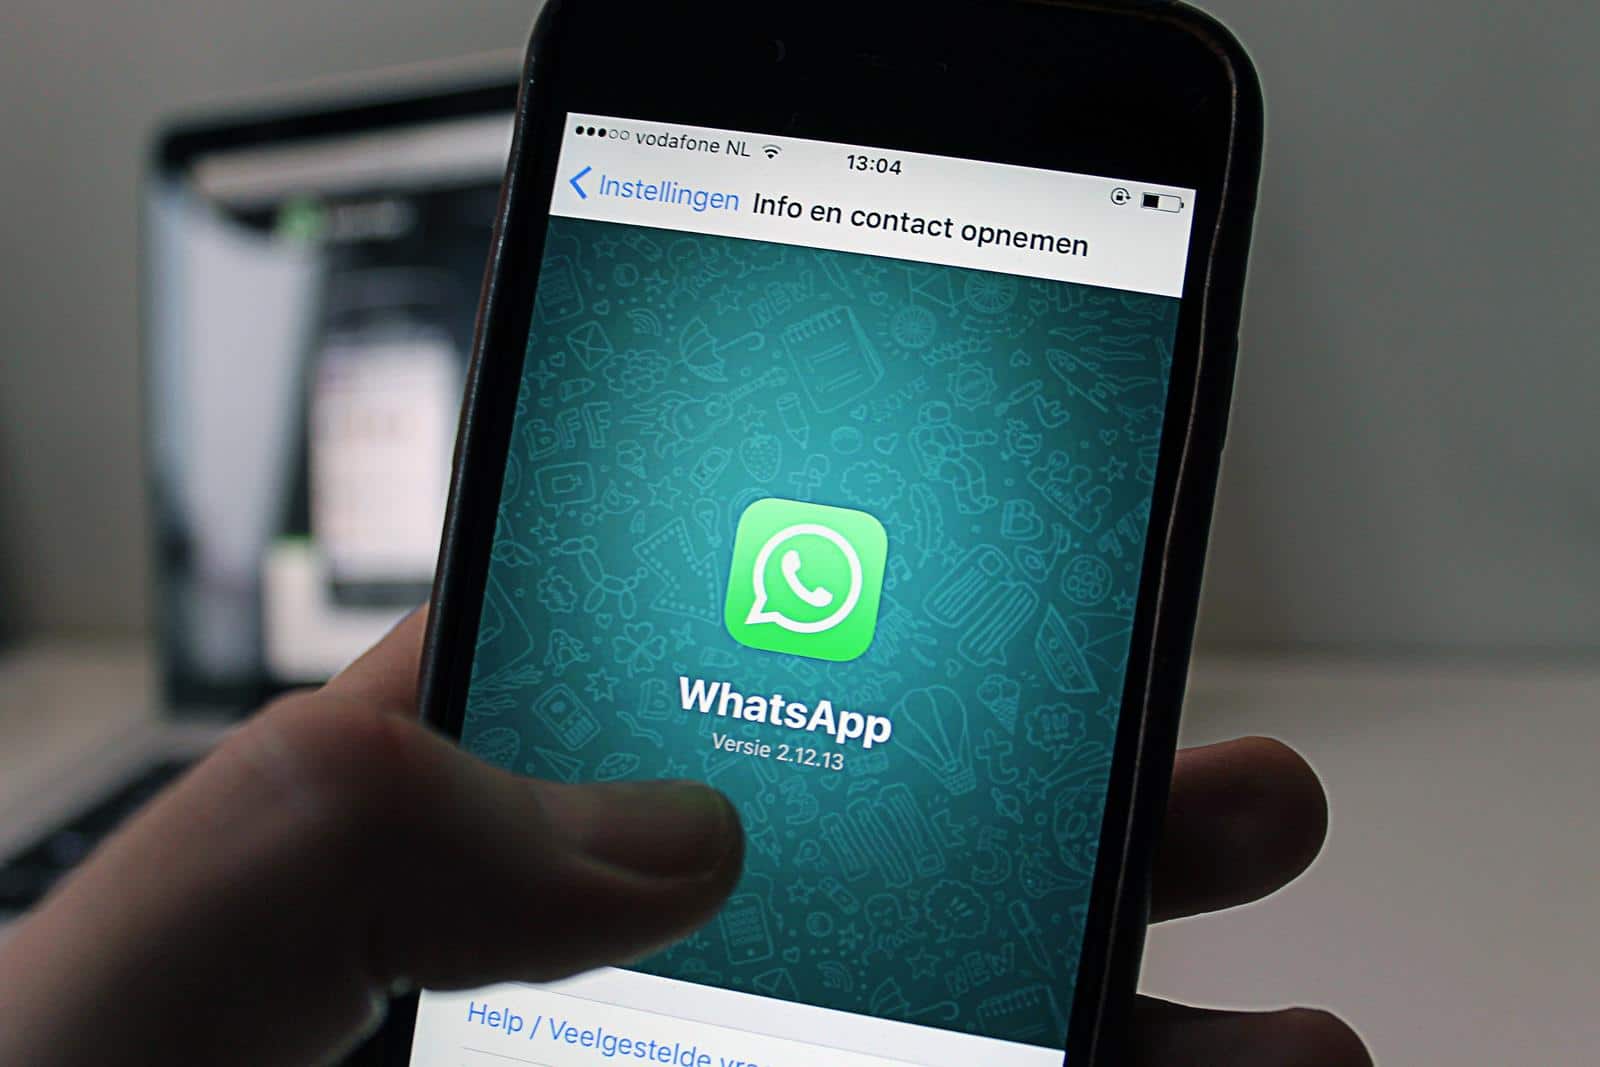 WhatsApp will finally let you transfer your chat history from iPhone to Android